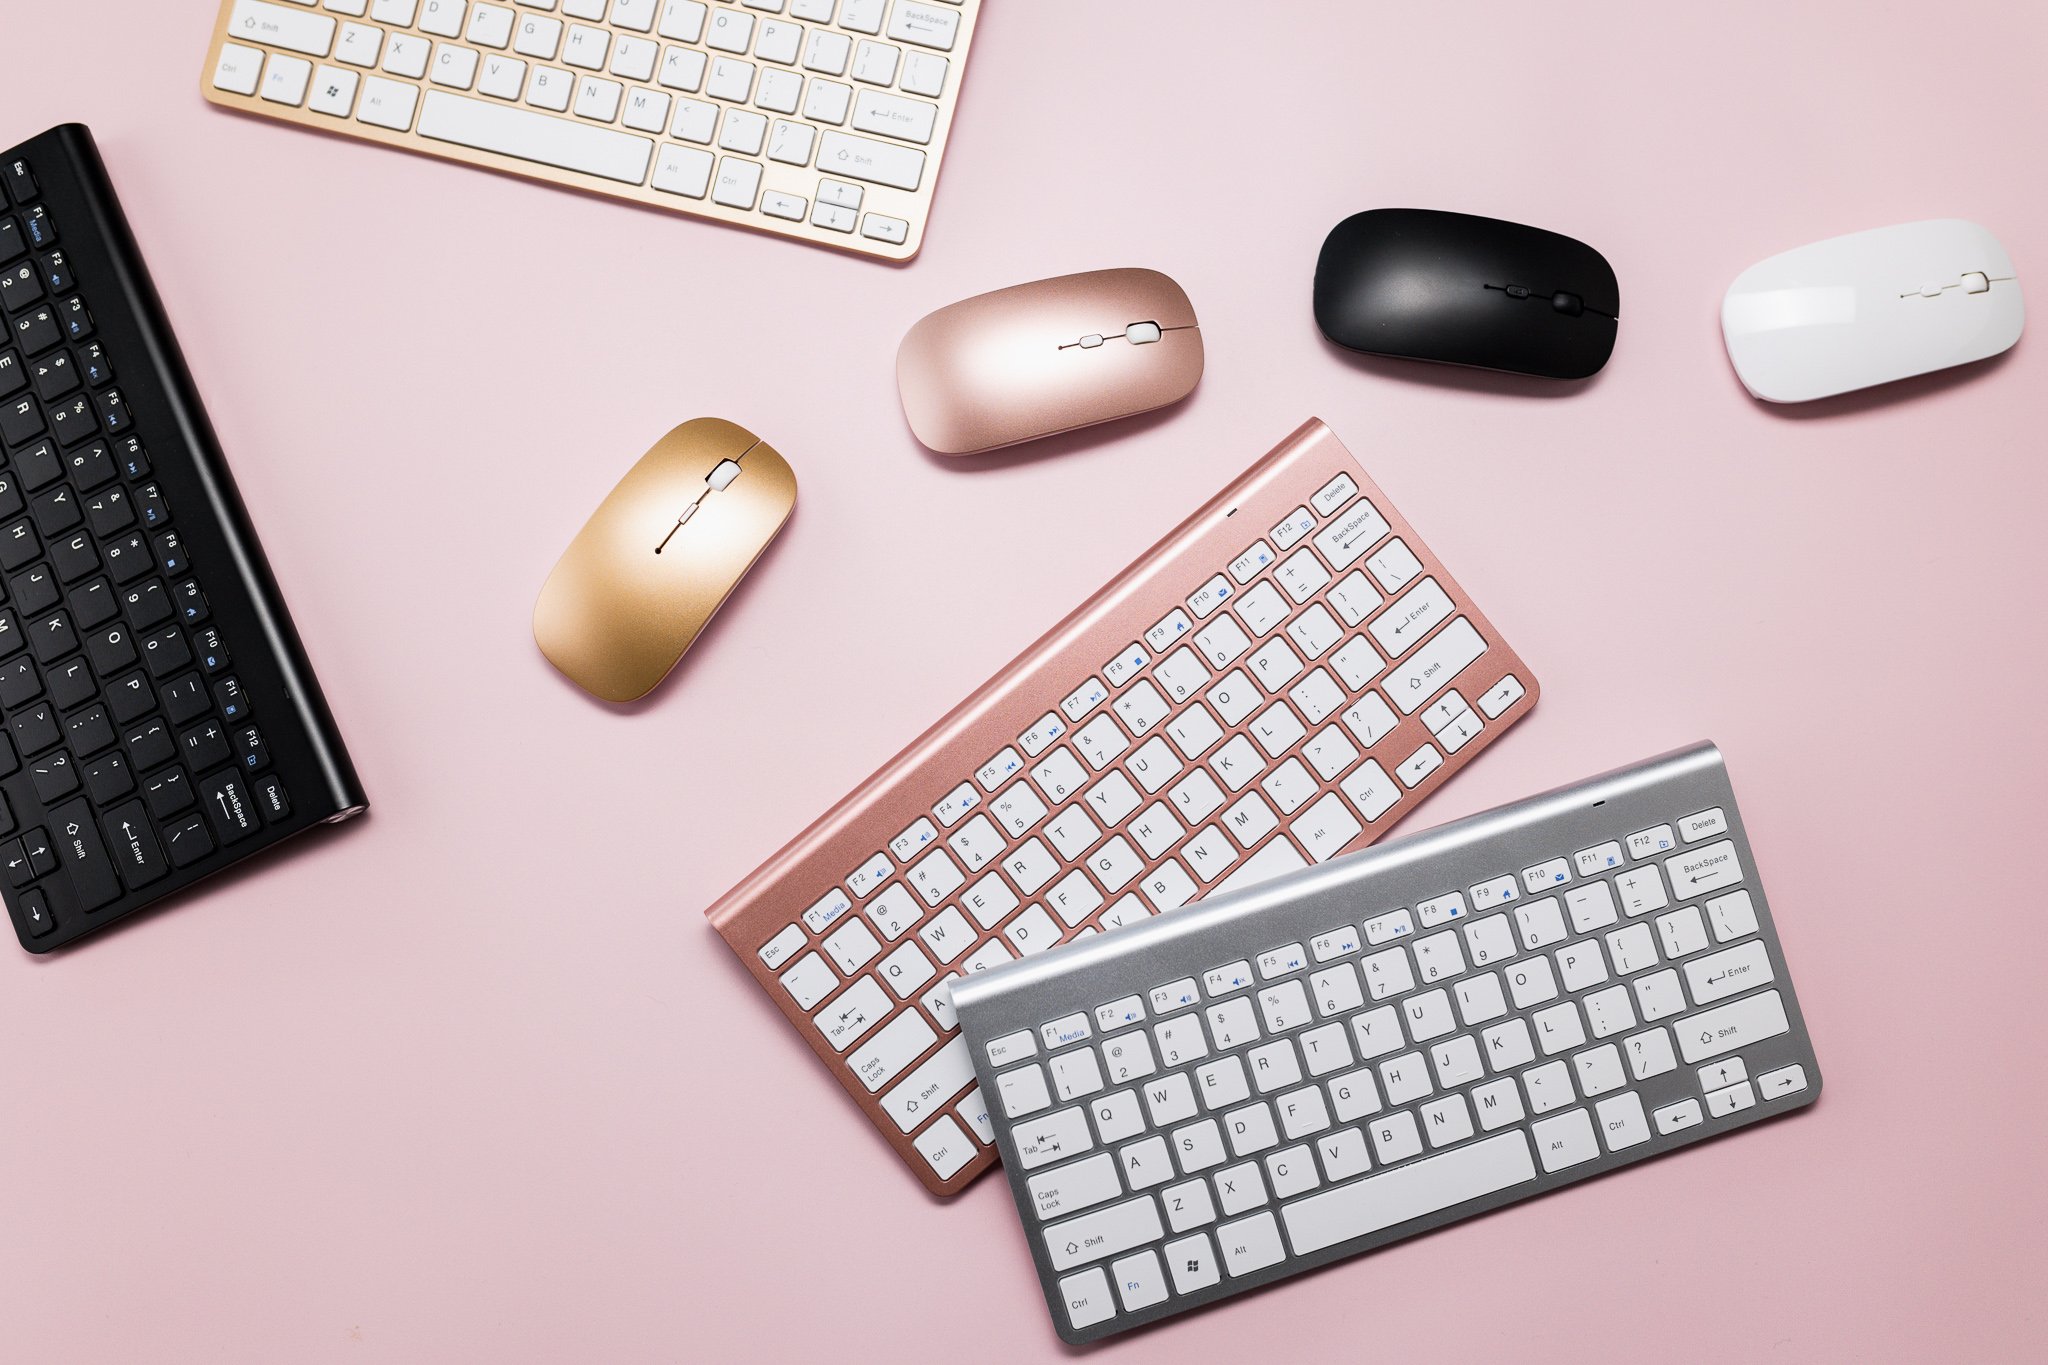 Canberra product photography - fun keyboards and mice